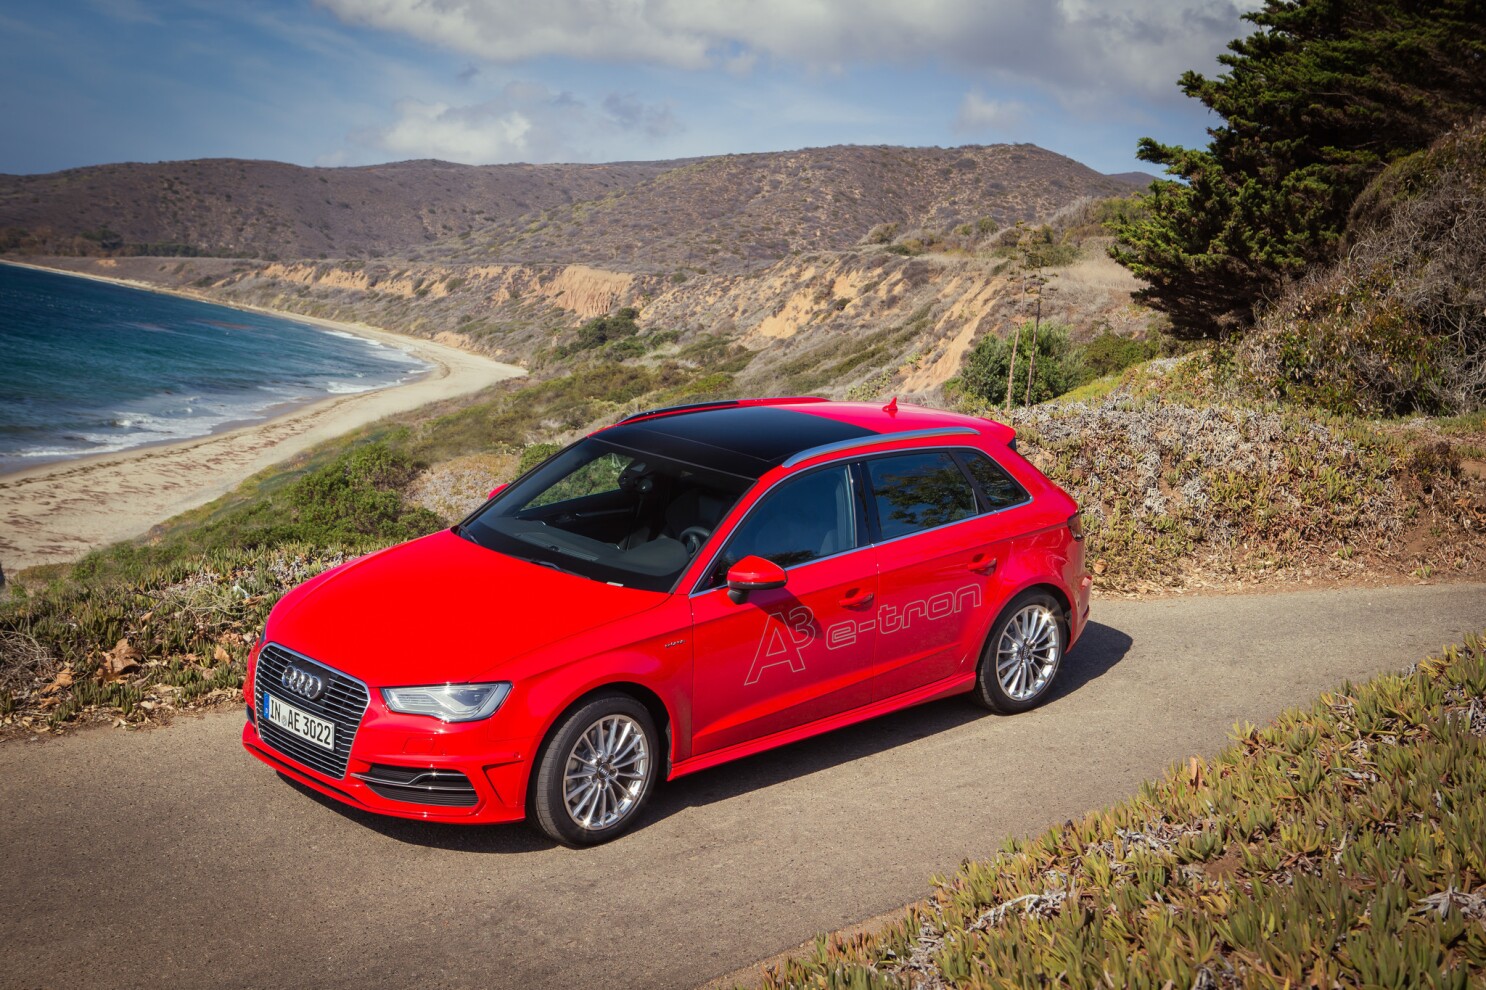 Speeltoestellen snap solo First Times Drive: 2015 Audi A3 e-tron plug-in hybrid - Los Angeles Times